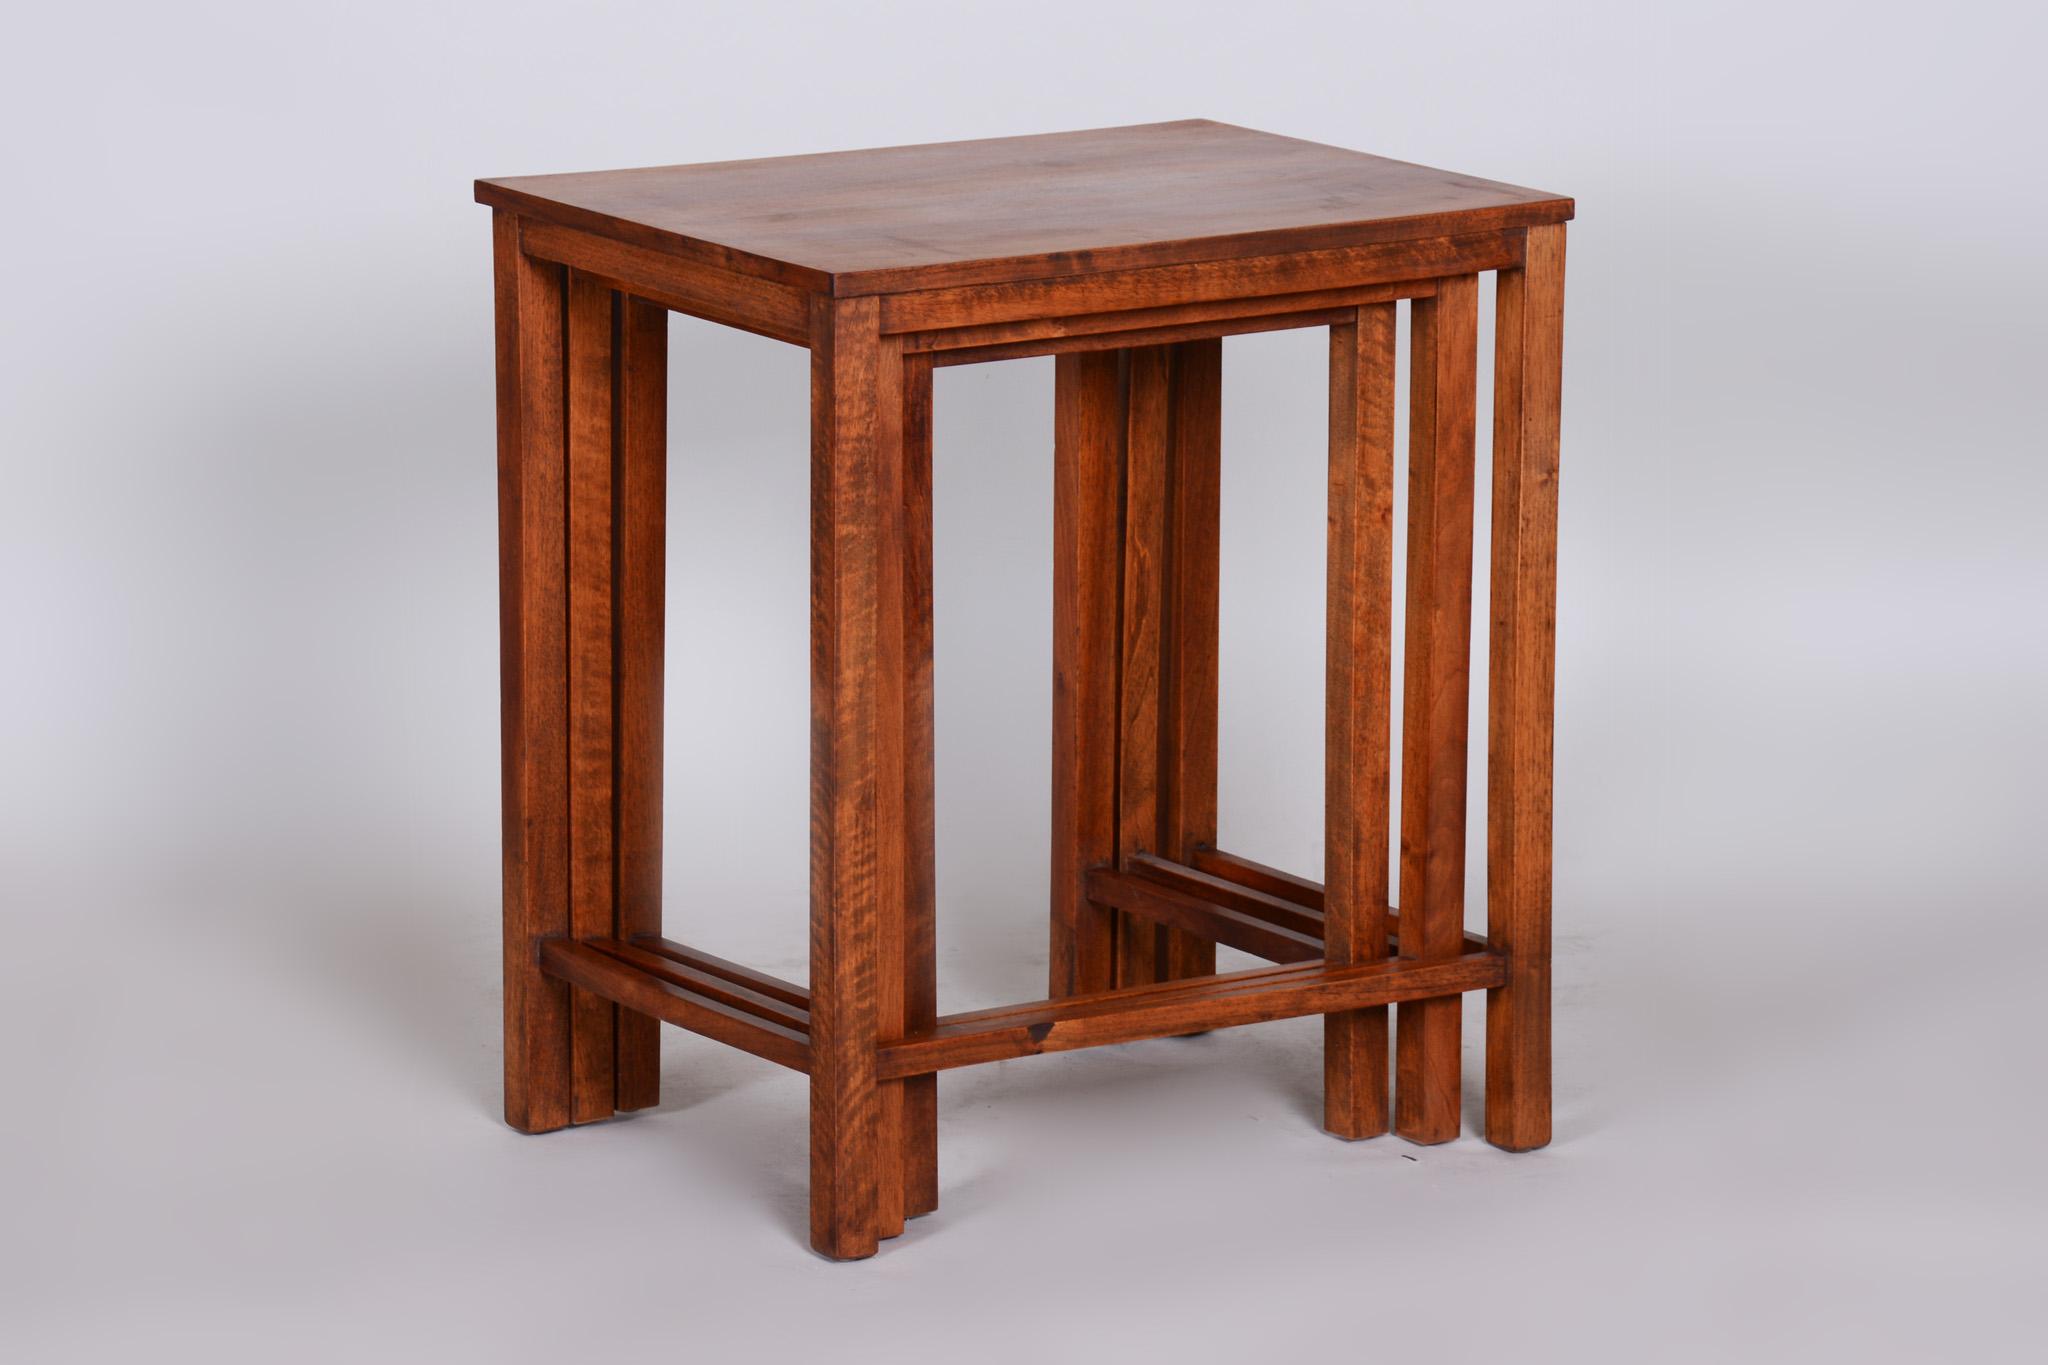 Original Condition Brown Nest Tables Made in the 1930s, Czech For Sale 5